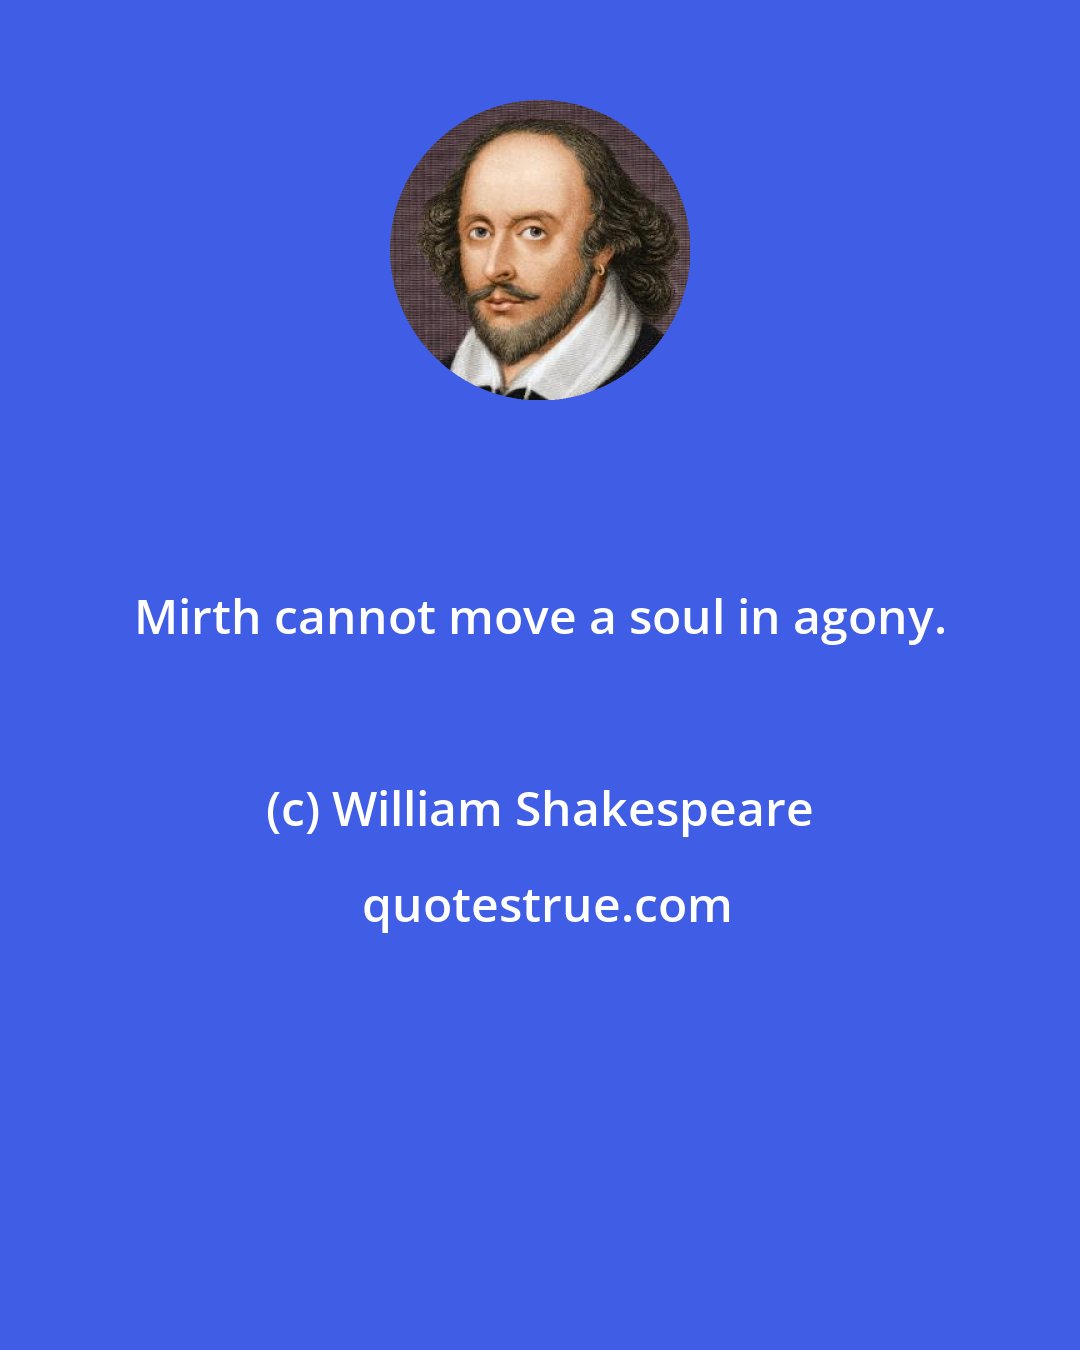 William Shakespeare: Mirth cannot move a soul in agony.